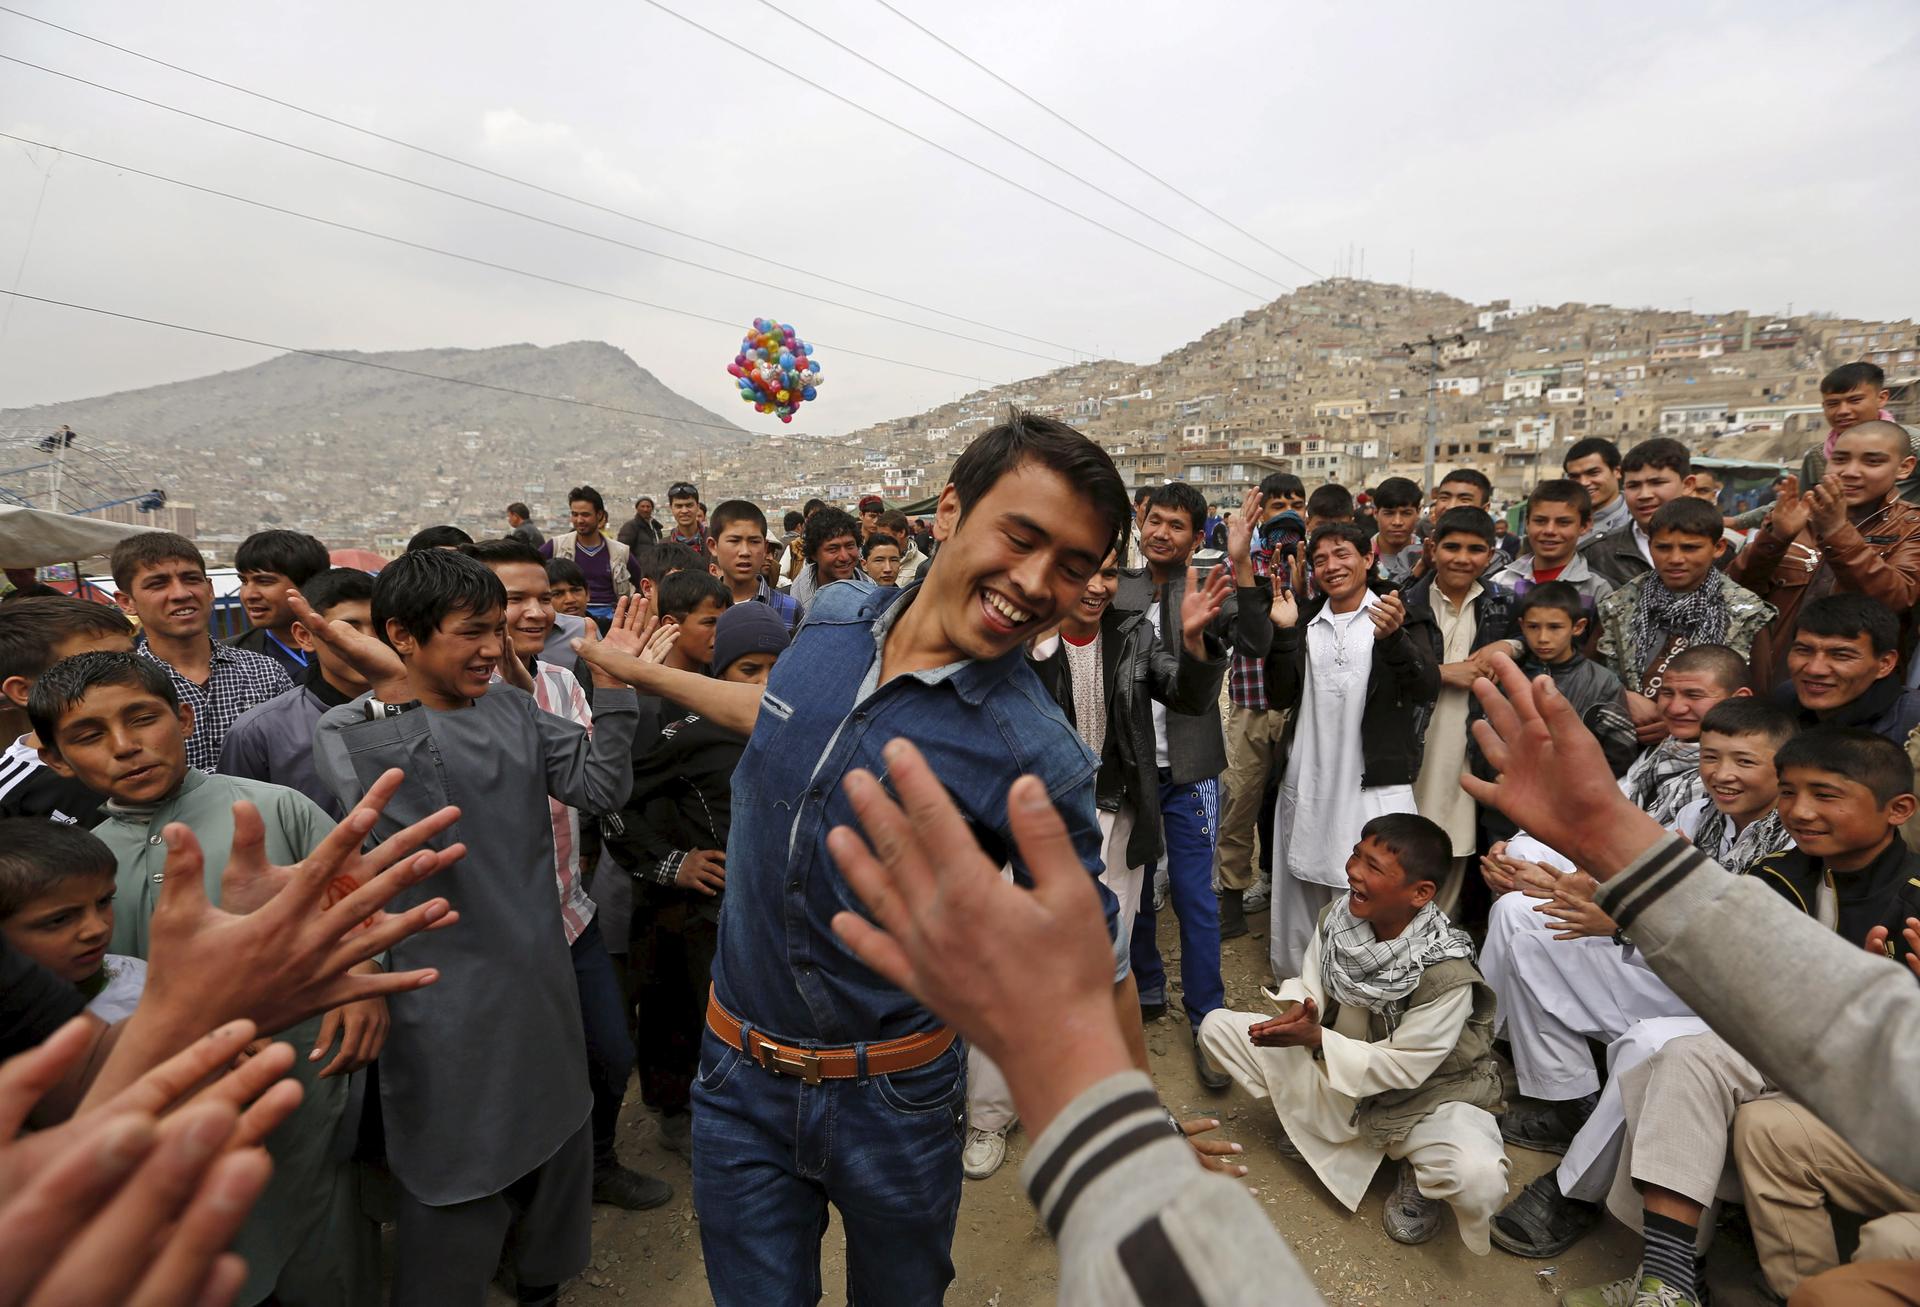 A man dances during celebrations for Afghan New Year, or Newroz, in Kabul on March 21, 2015.